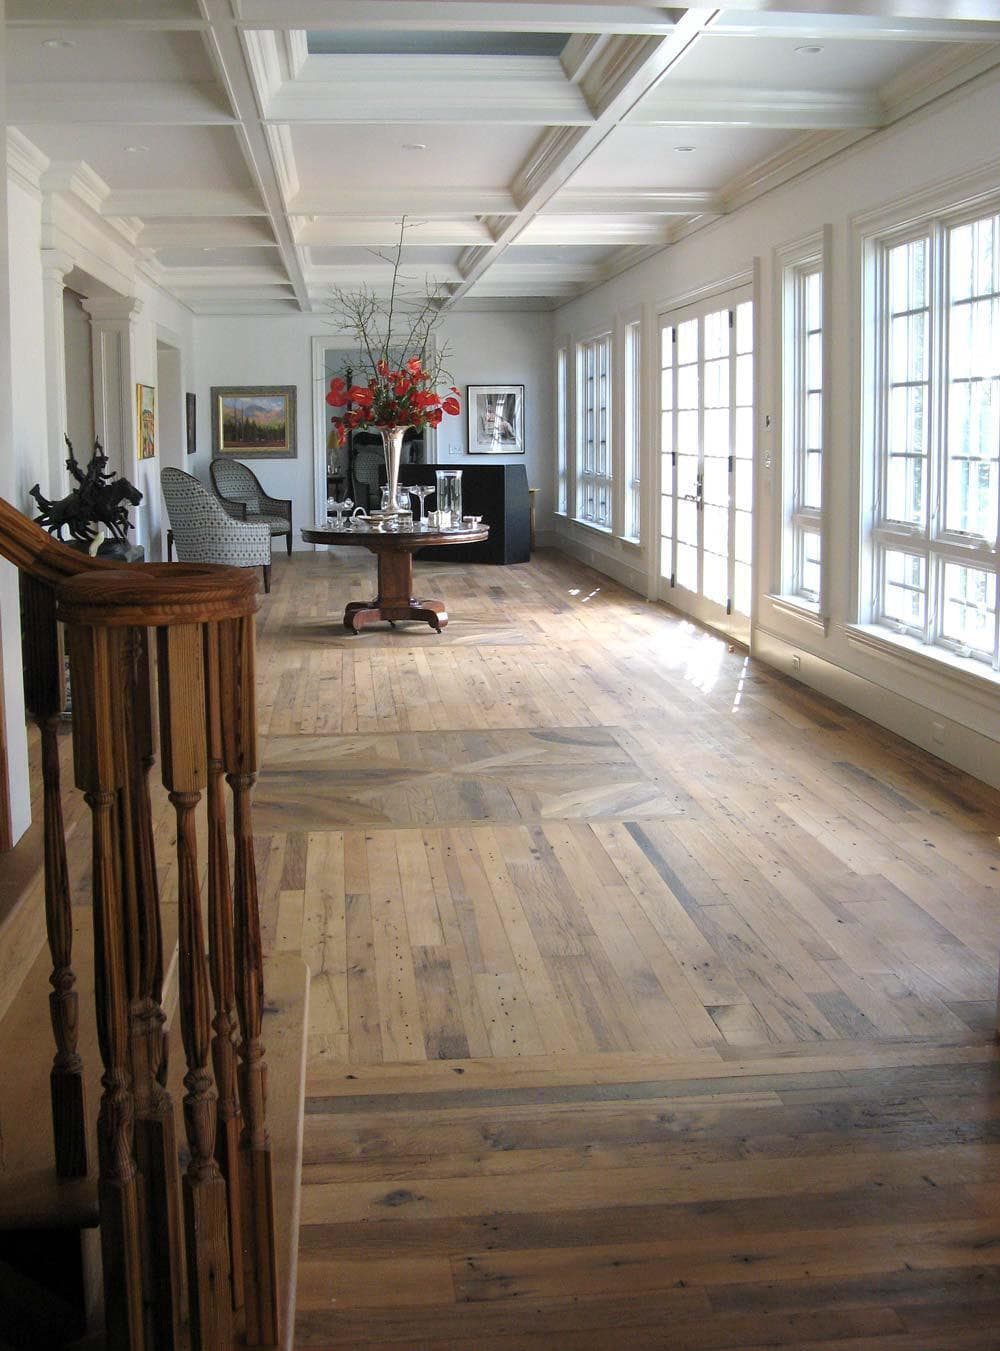 Reclaimed wood flooring in long living room with many windows.